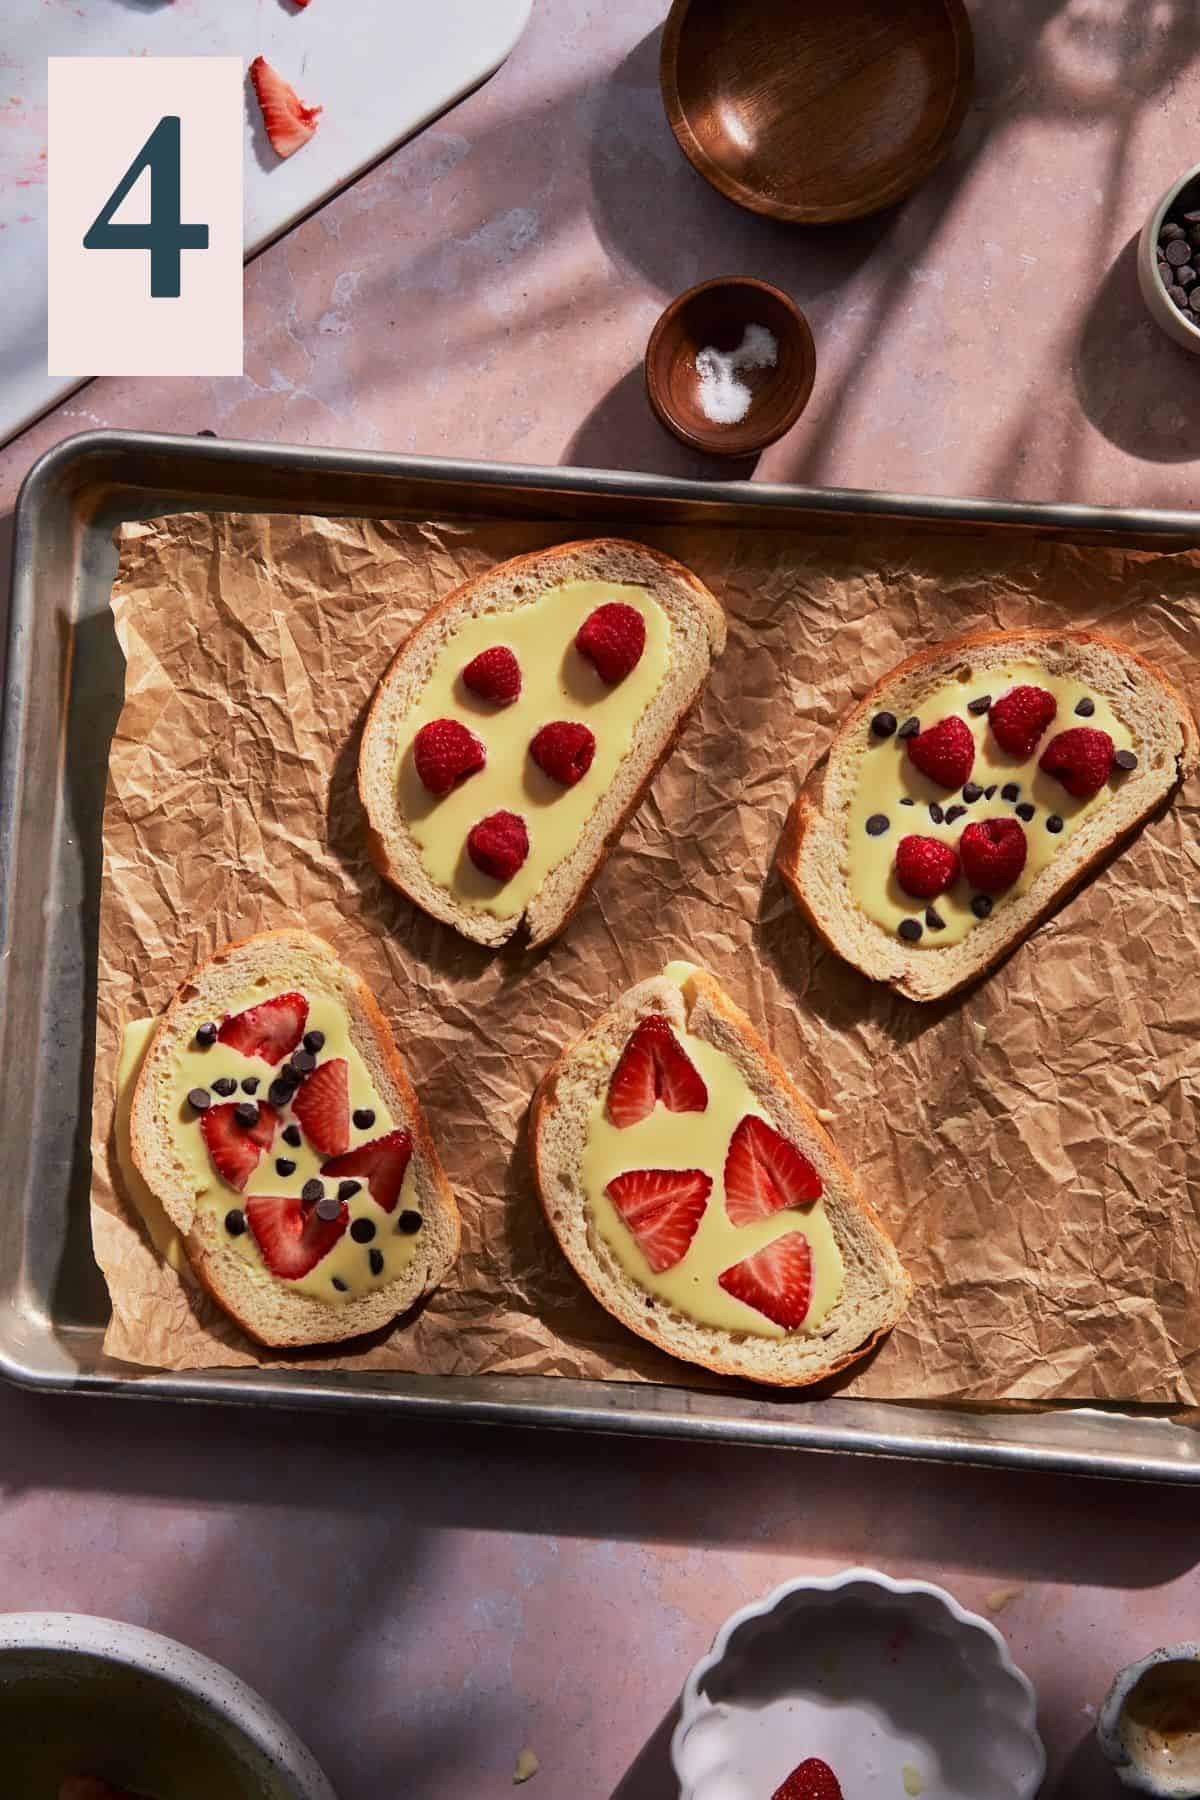 Topping custard toast with chocolate chips, strawberries, and raspberries before baking.